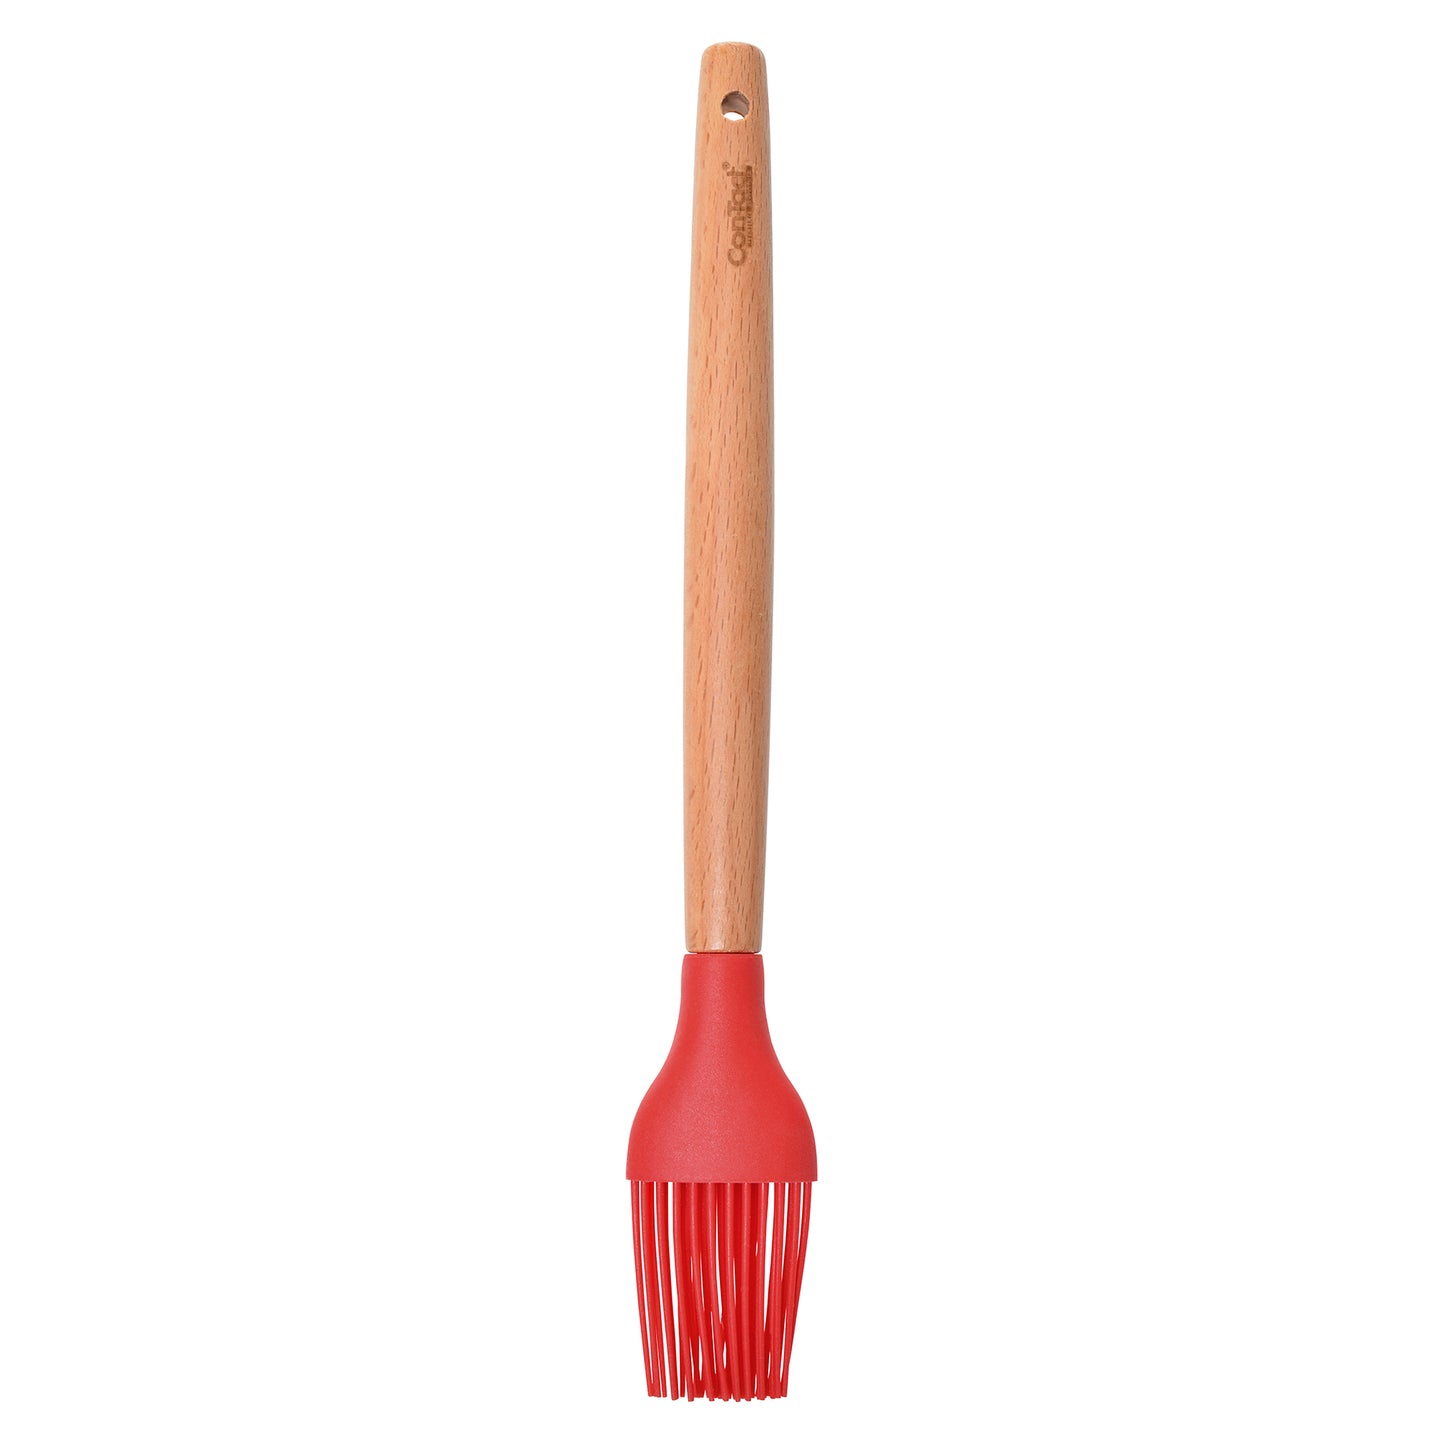 Silicone Utensils with Beech Wood Handles - Red